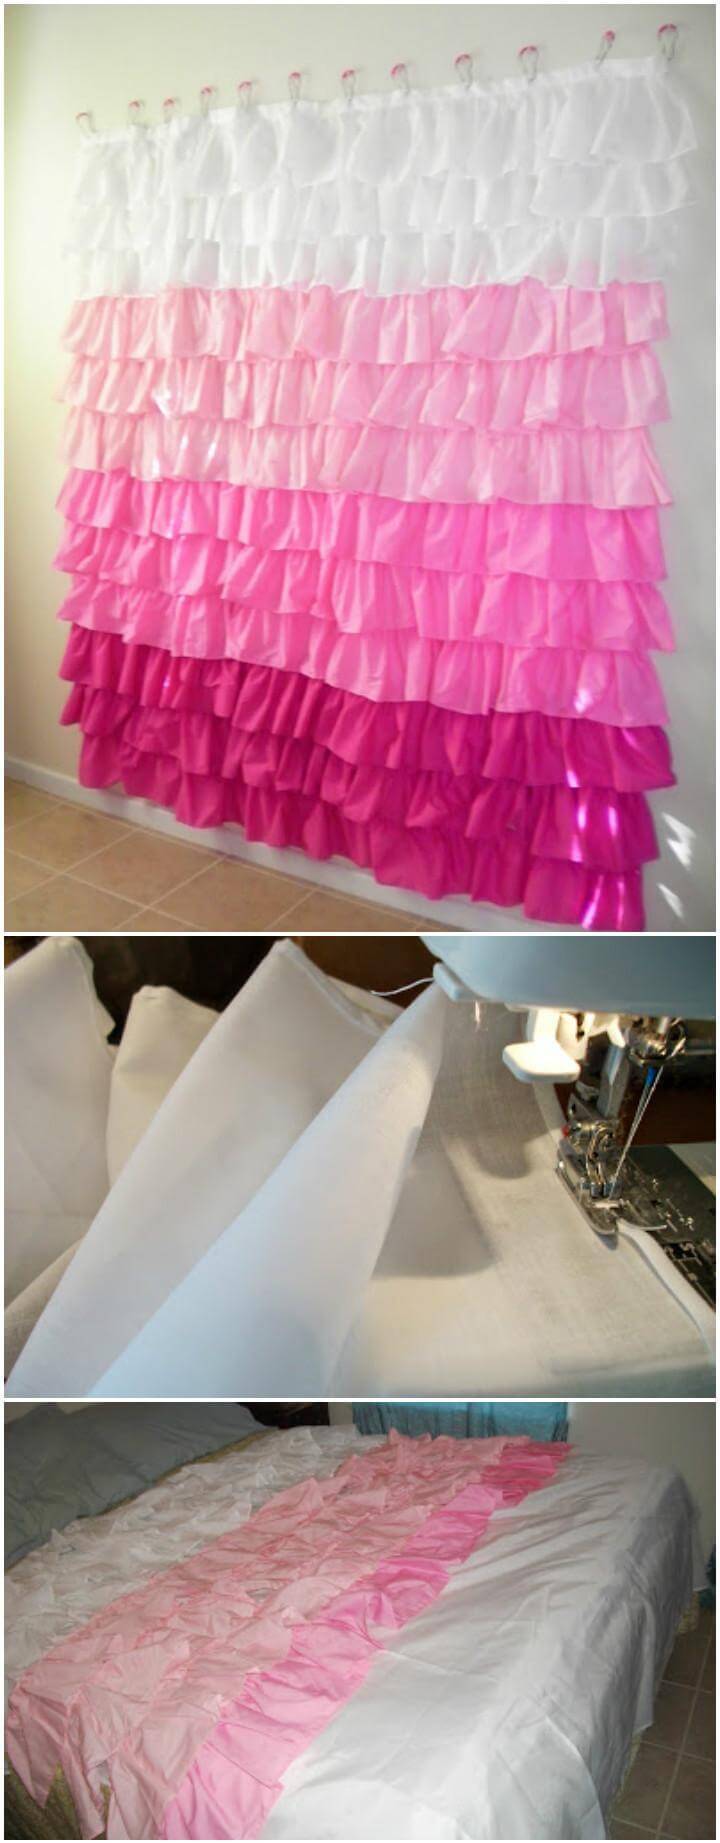 Cool DIY oodles of ruffles shower curtain